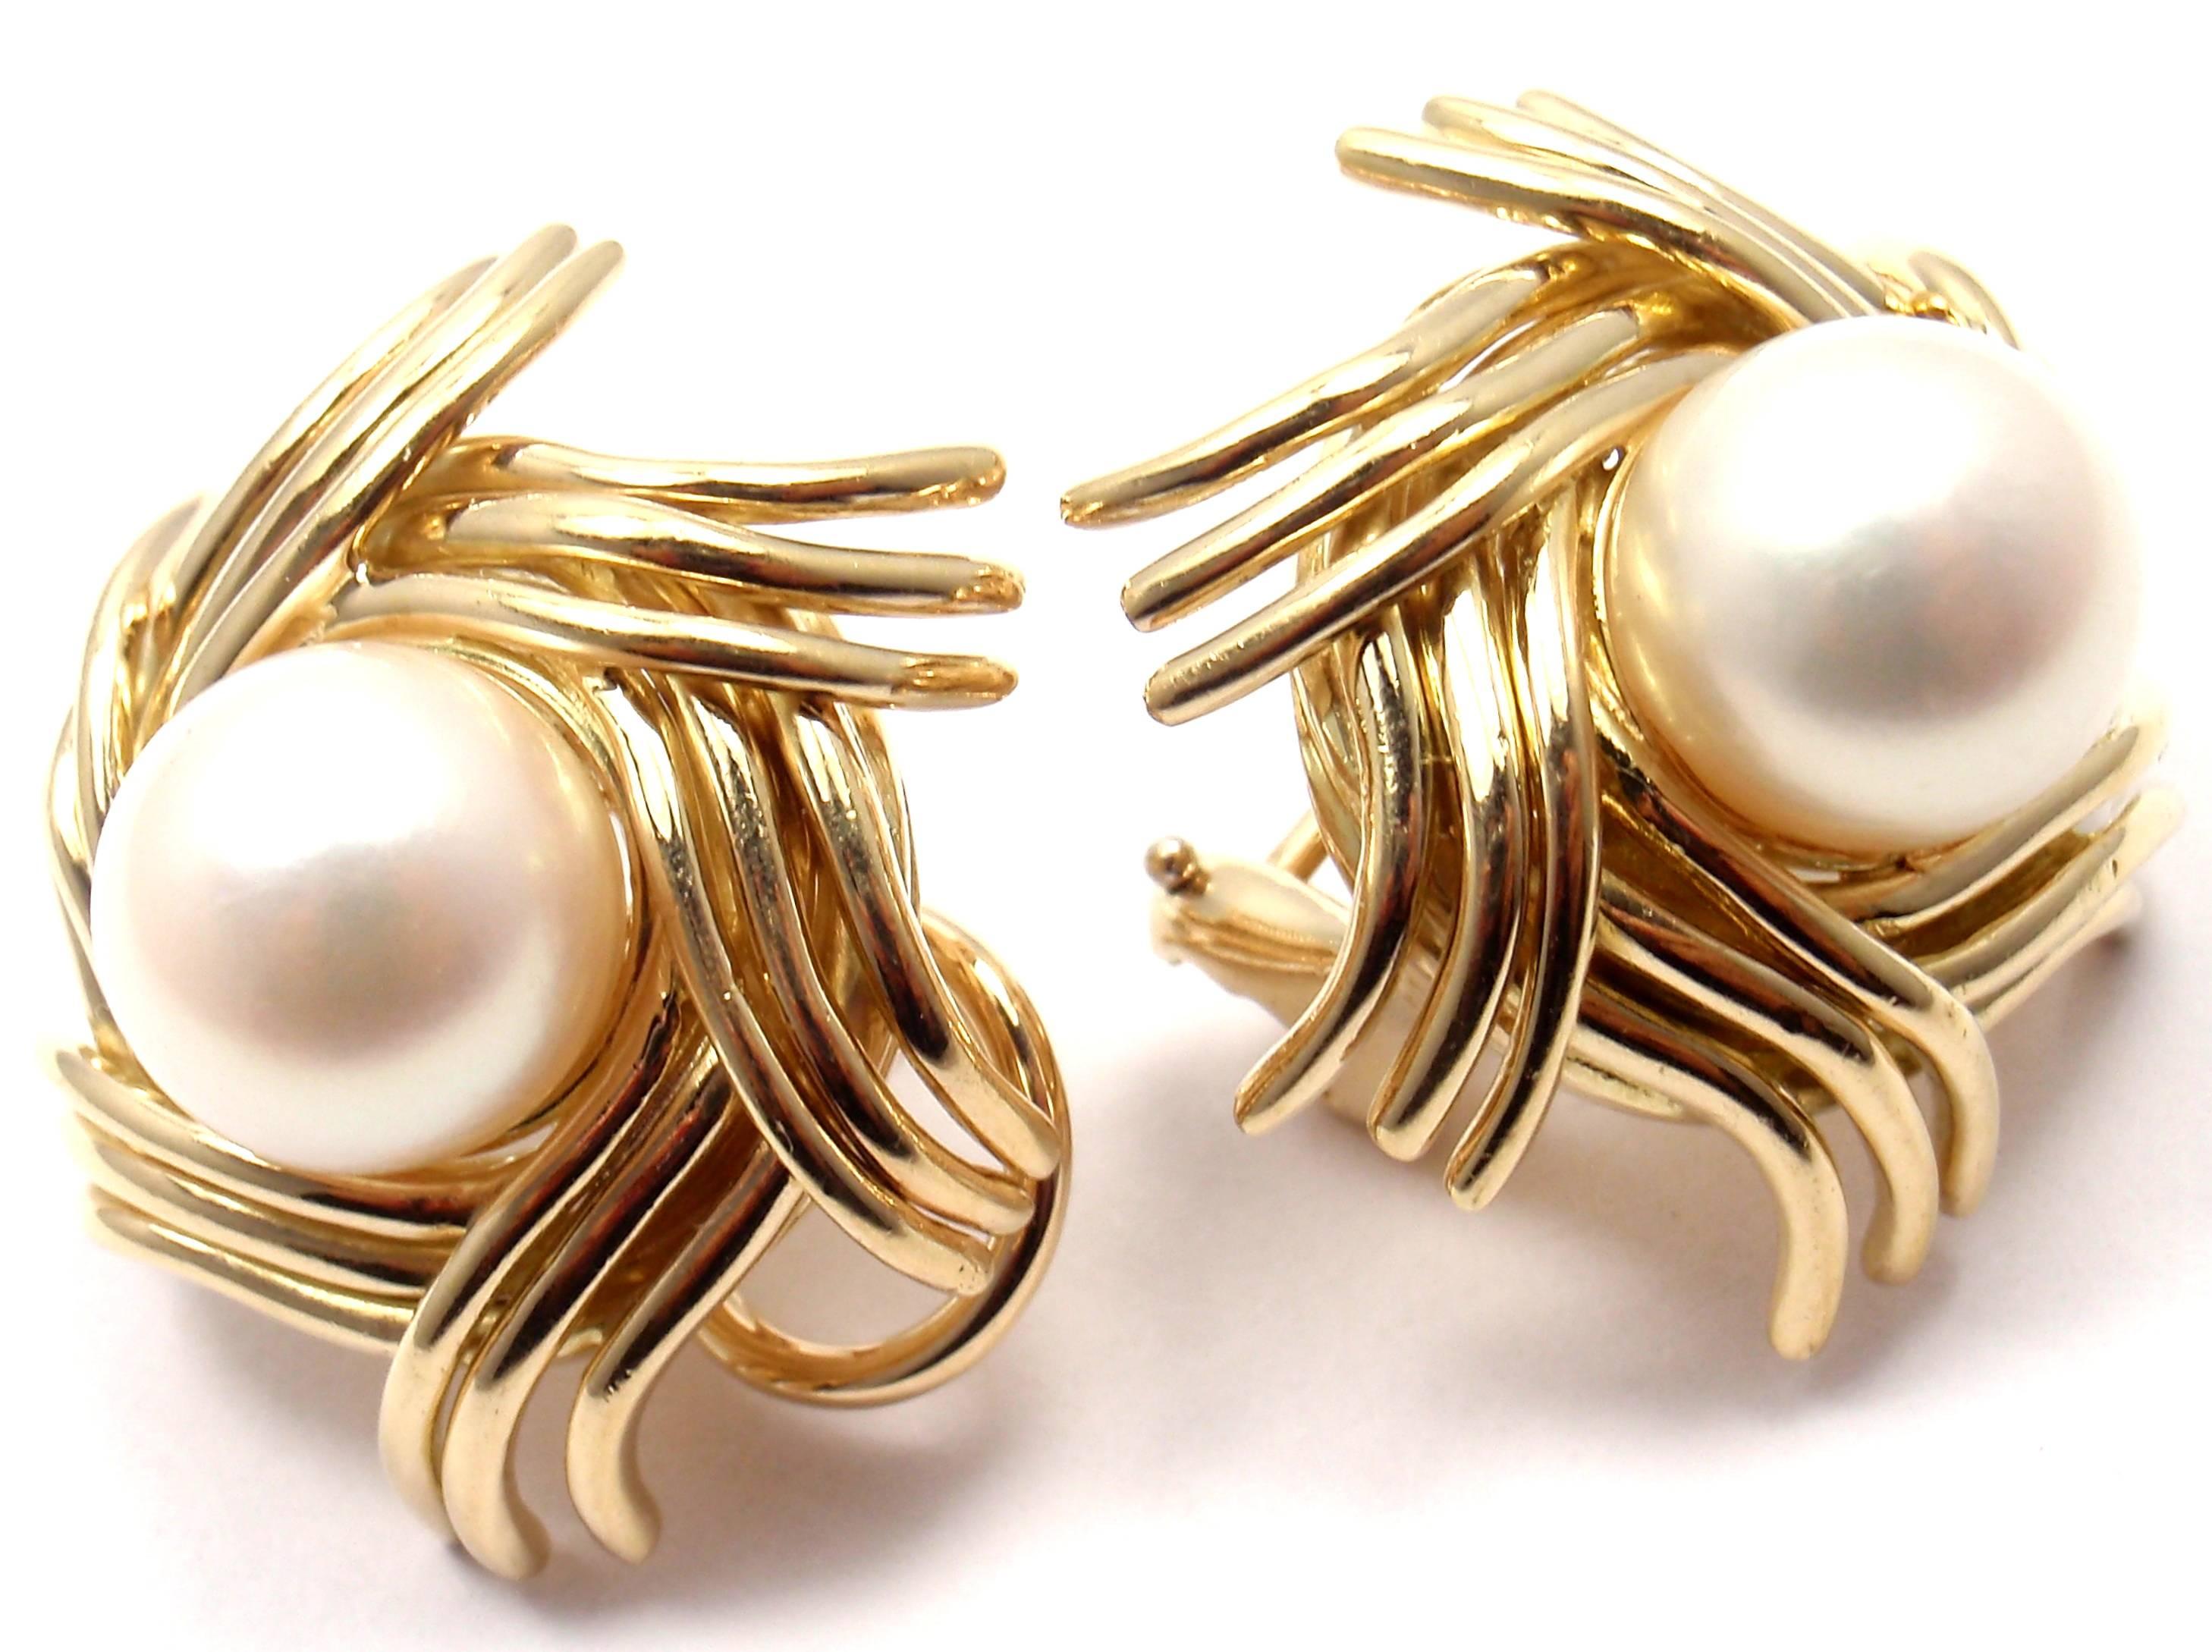 18k Yellow Gold Pearl by Jean Schlumberger Earrings for Tiffany & Co. 
With two 9mm cultured pearls. 
These earrings are for pierced ears.

Details: 
Length: 23mm
Width: 22mm
Weight: 22.5 grams
Stamped Hallmarks: Tiffany & Co Schlumberger